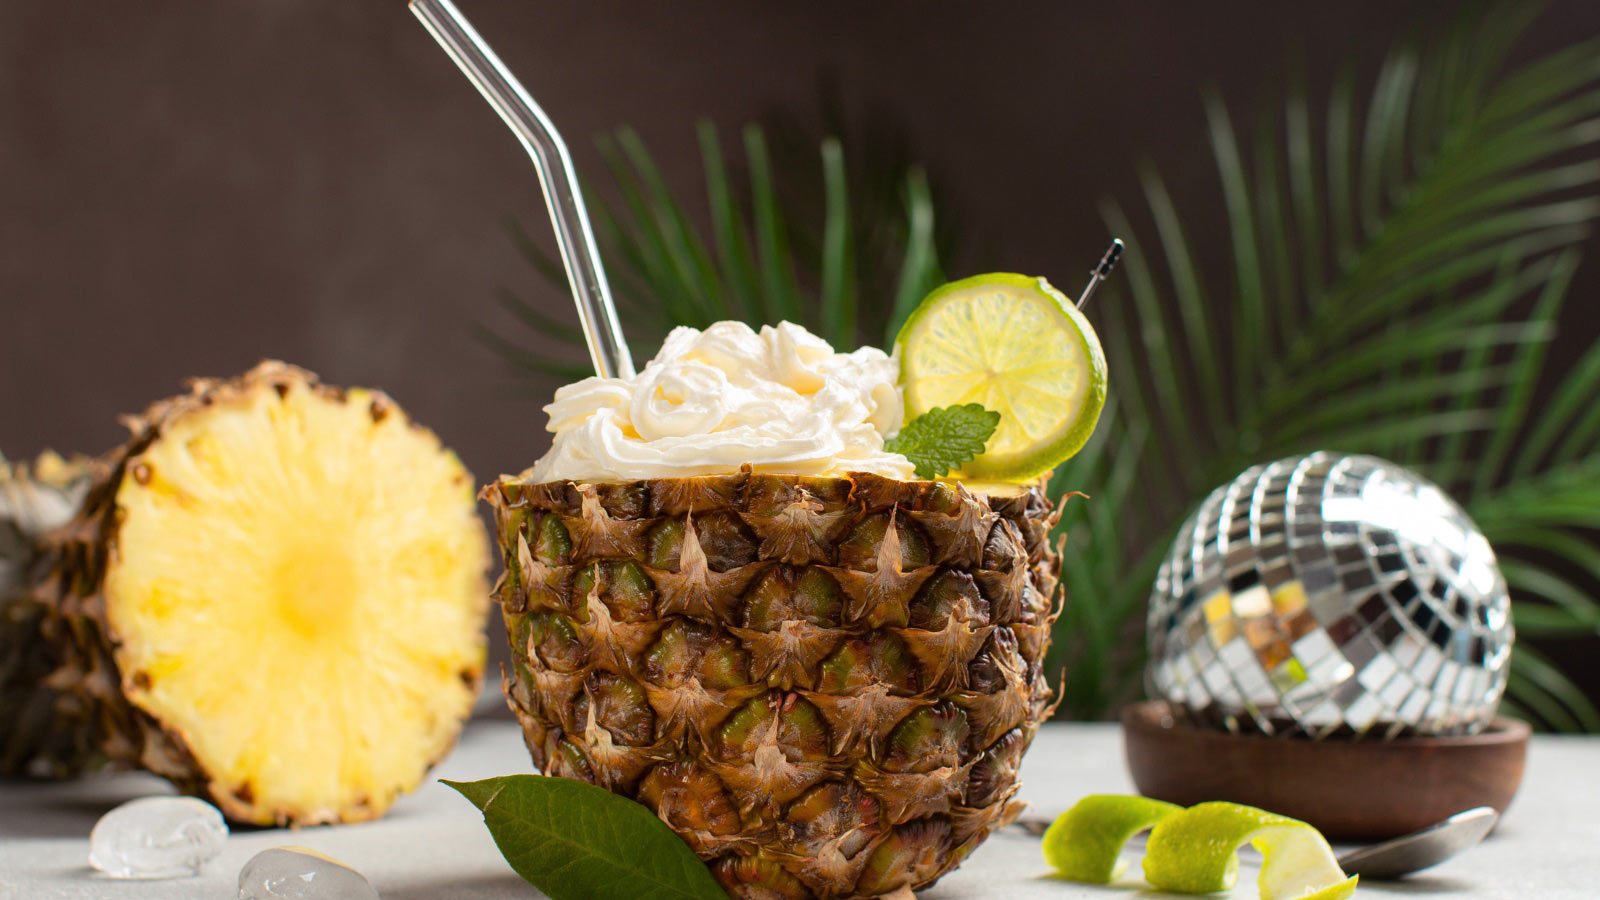 Refreshing pineapple whip in half of a ripe pineapple.